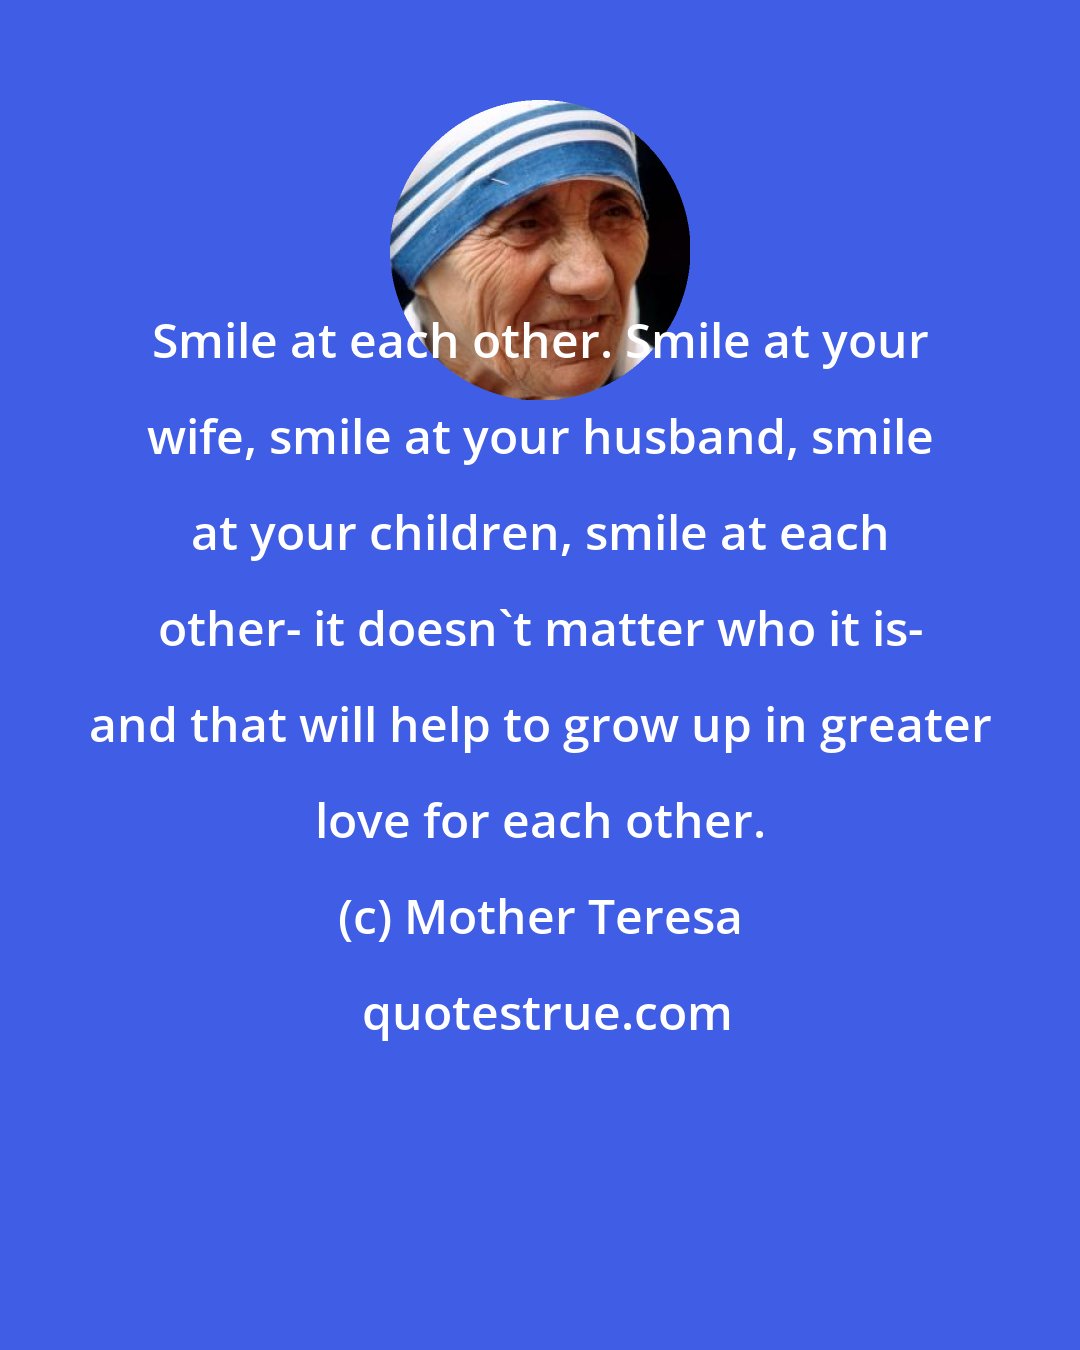 Mother Teresa: Smile at each other. Smile at your wife, smile at your husband, smile at your children, smile at each other- it doesn't matter who it is- and that will help to grow up in greater love for each other.